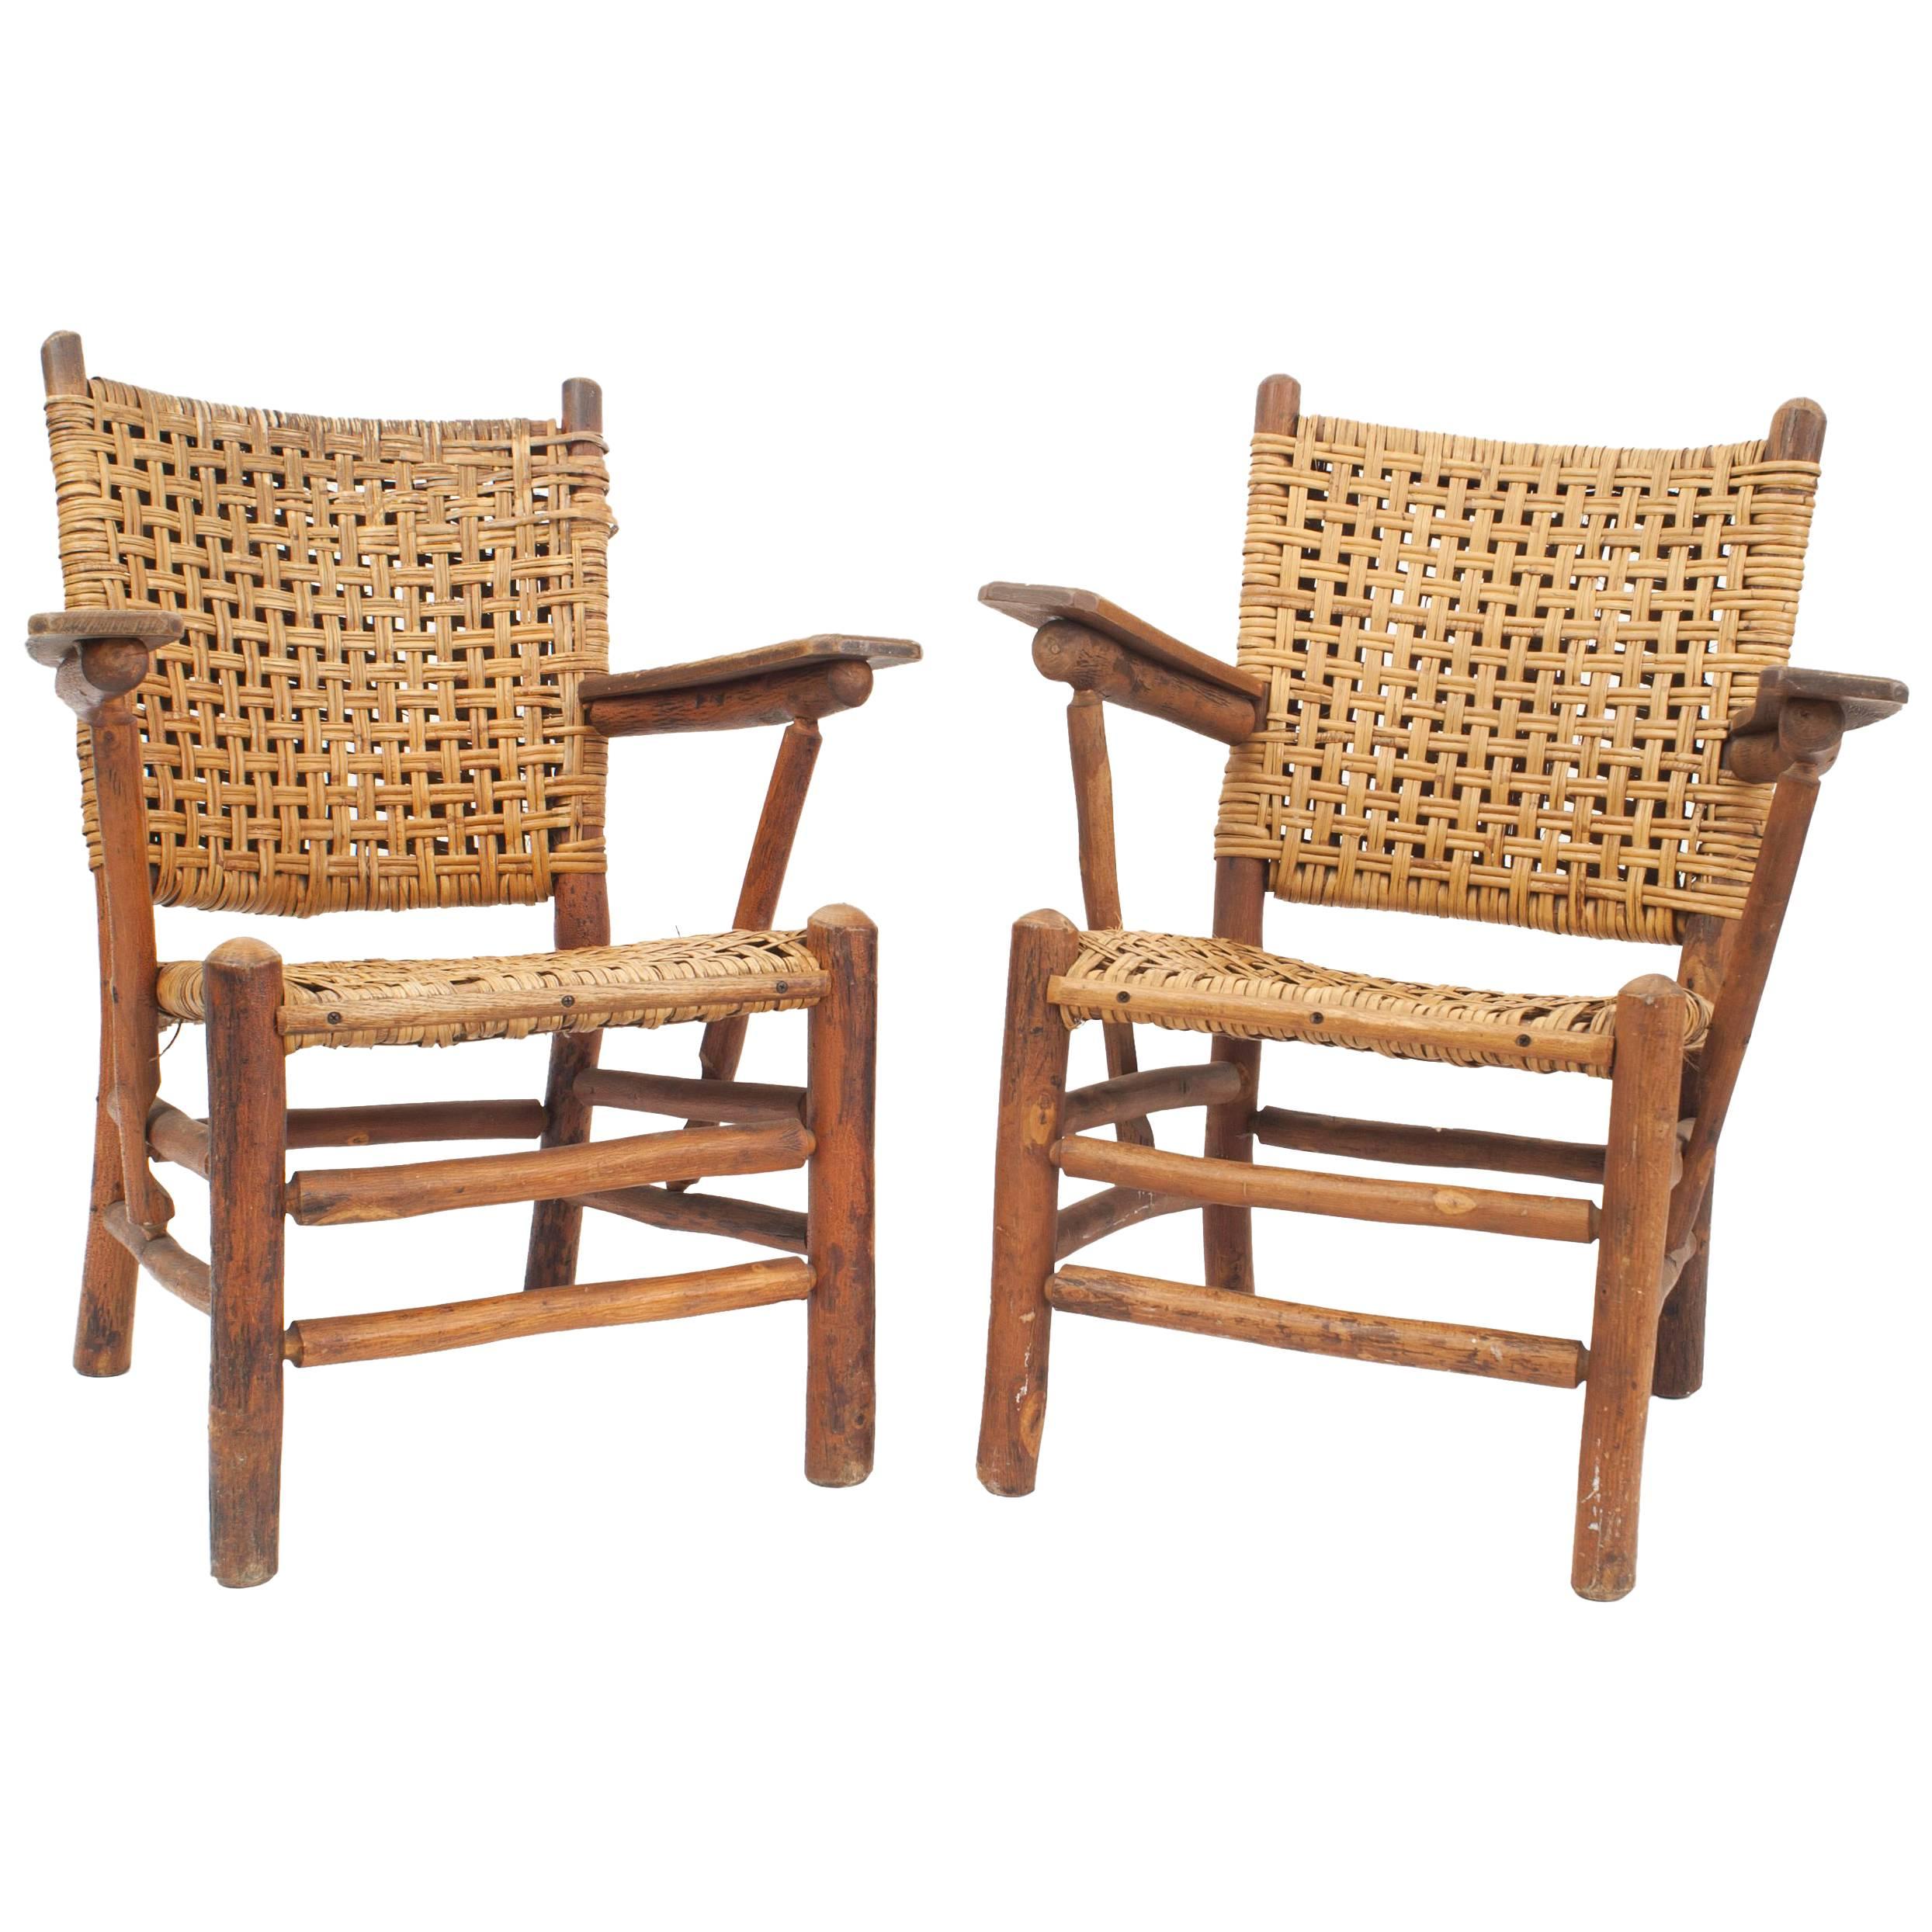 Pair of Old Hickory Woven Pine Armchairs